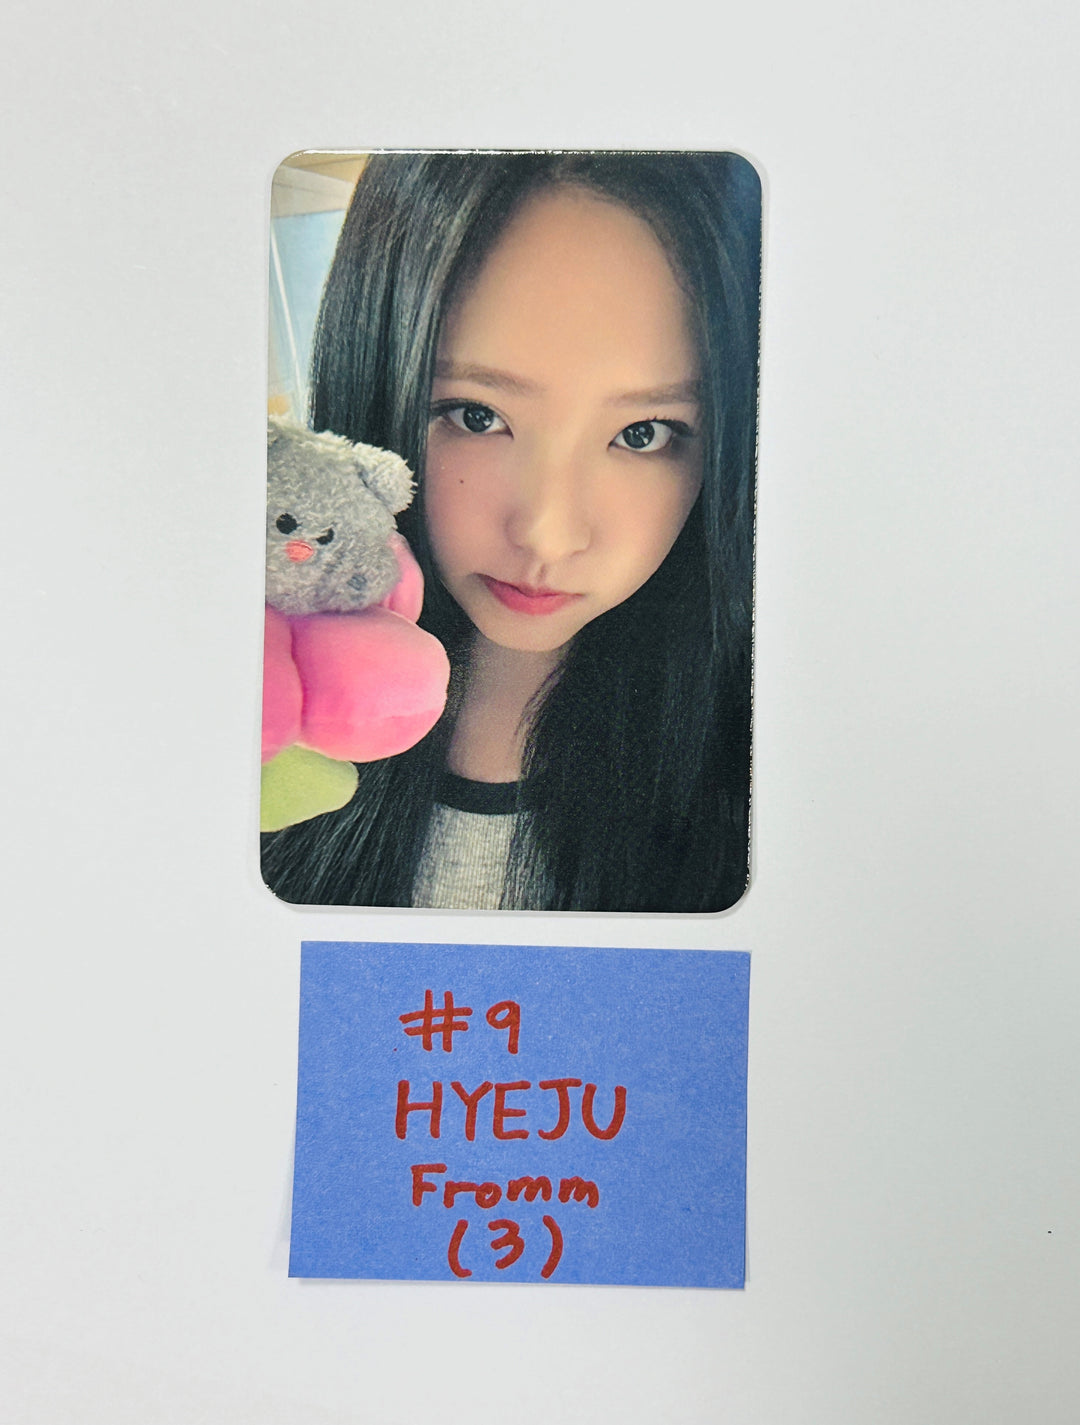 Loossemble "One of a Kind" - Fromm Store Fansign Event Photocard [24. 05. 03]